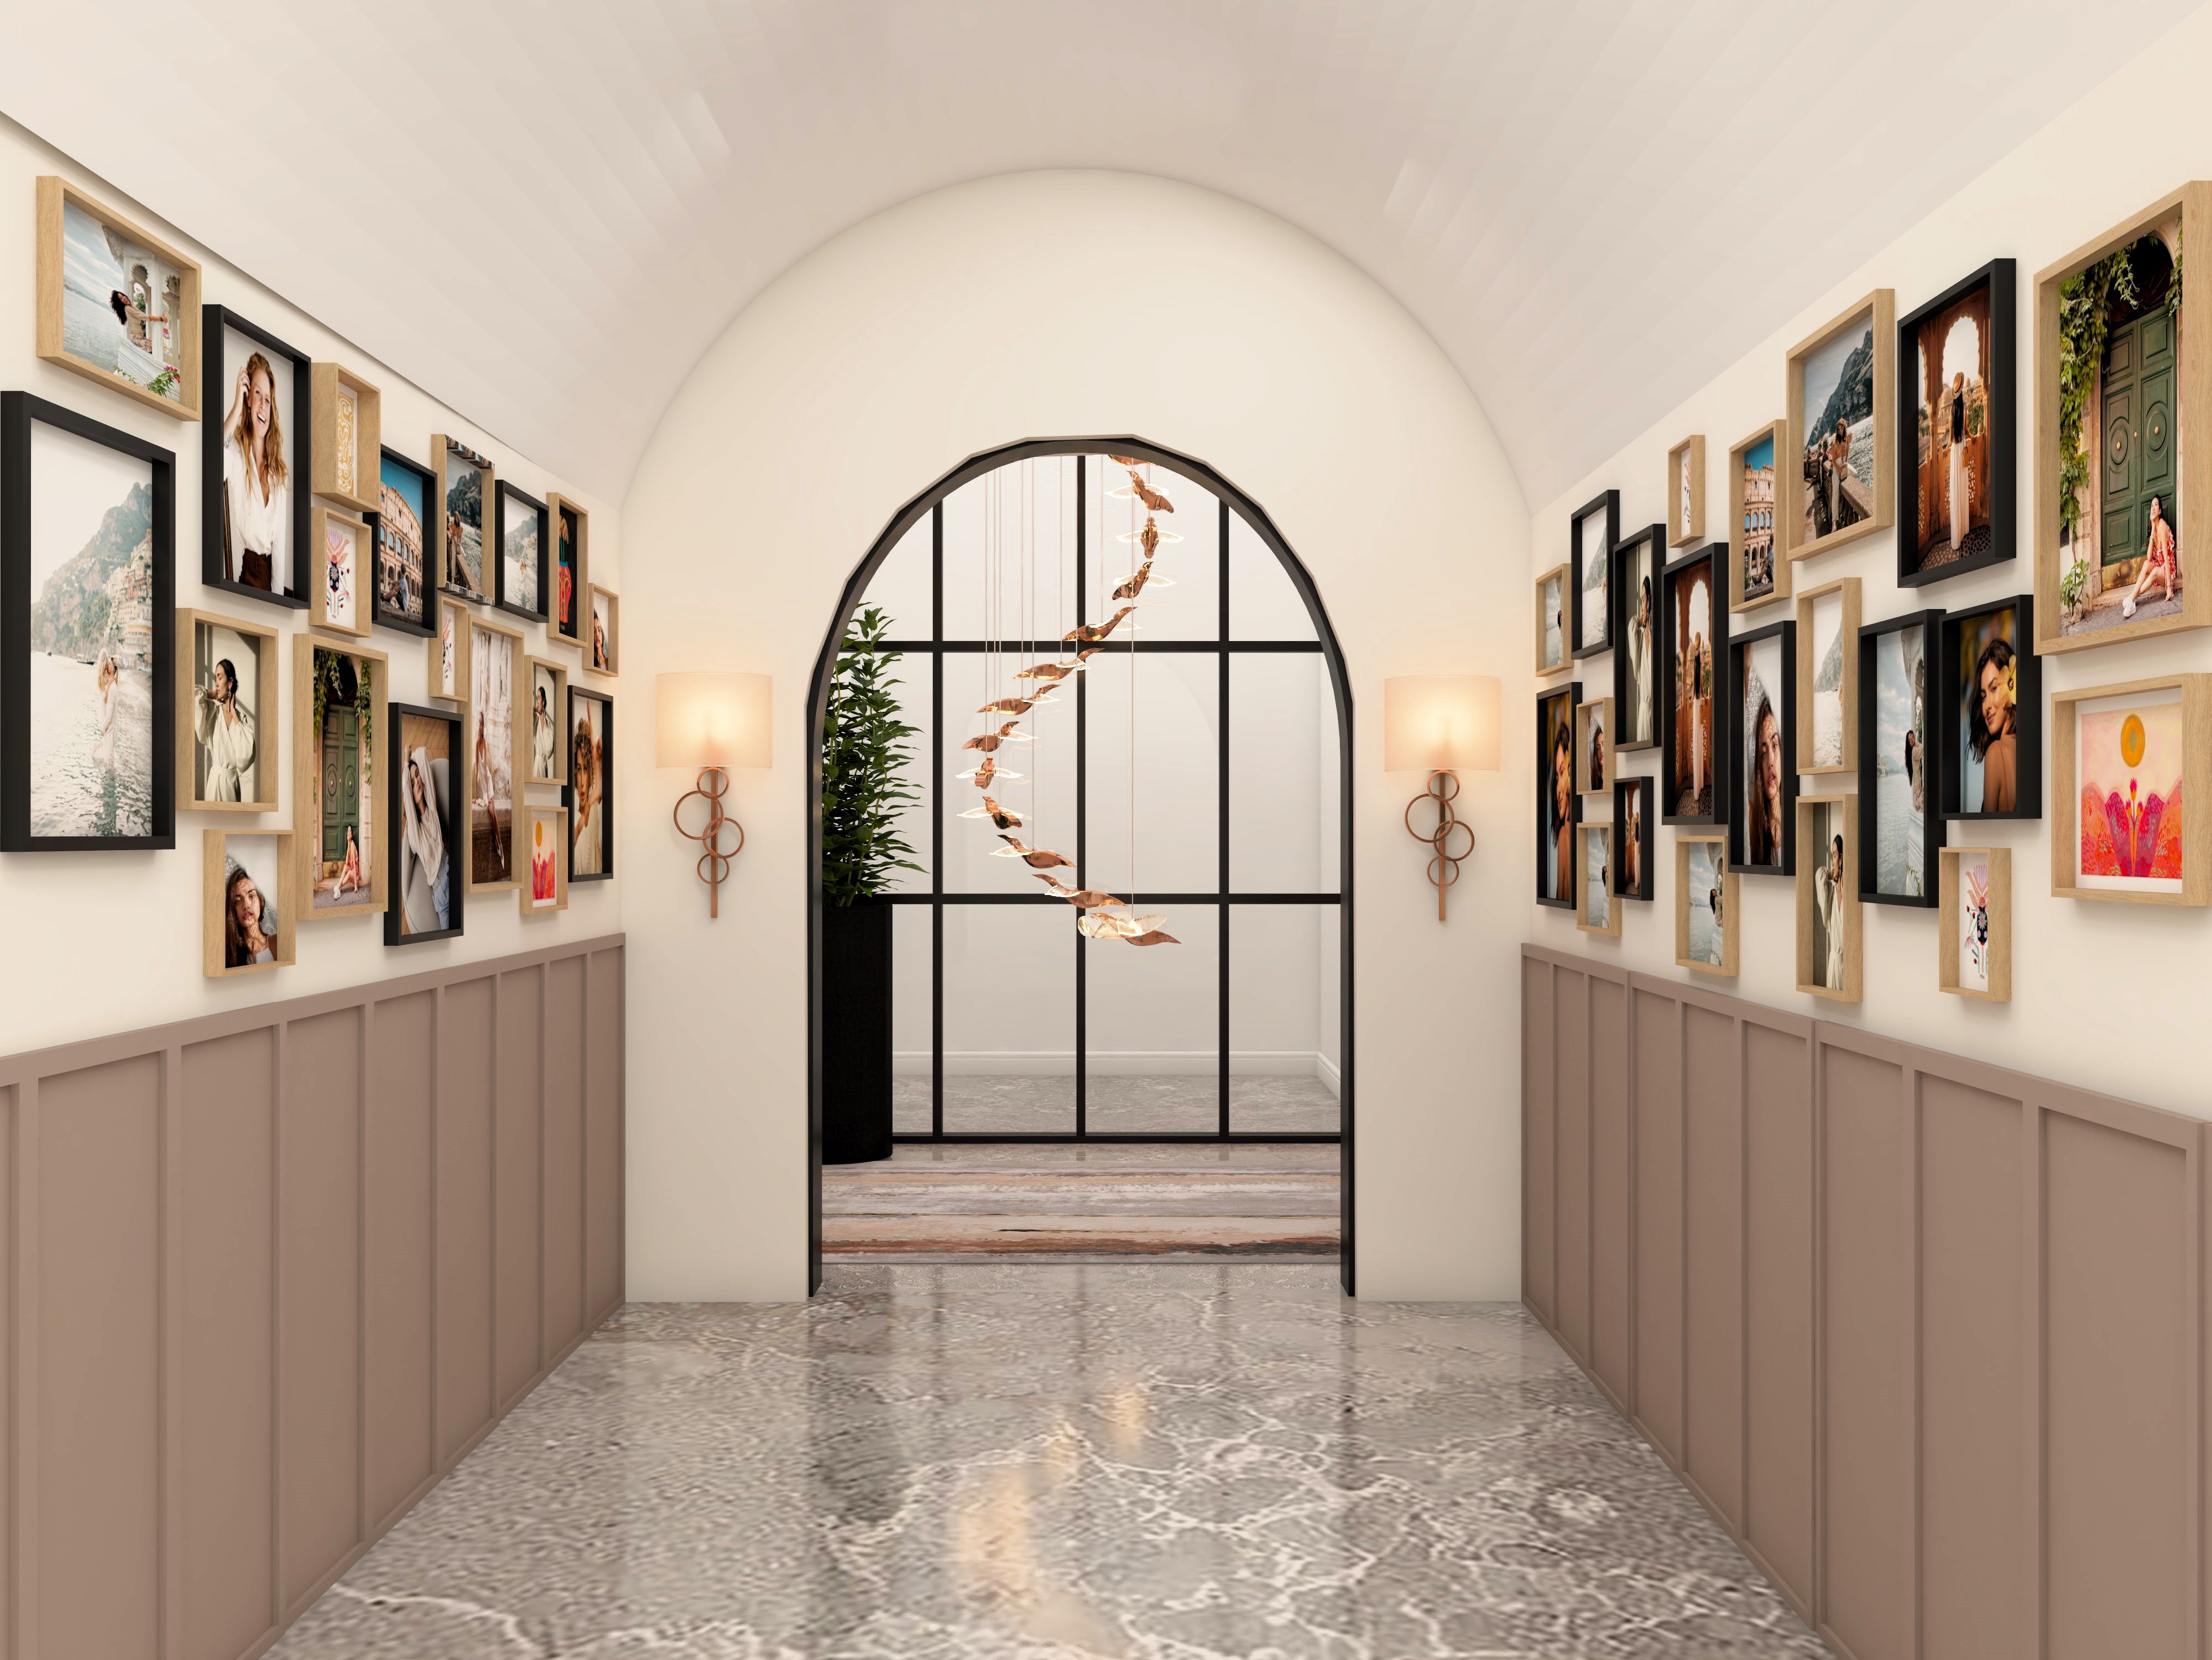 White and beige foyer area with gallery wall and arched glass door